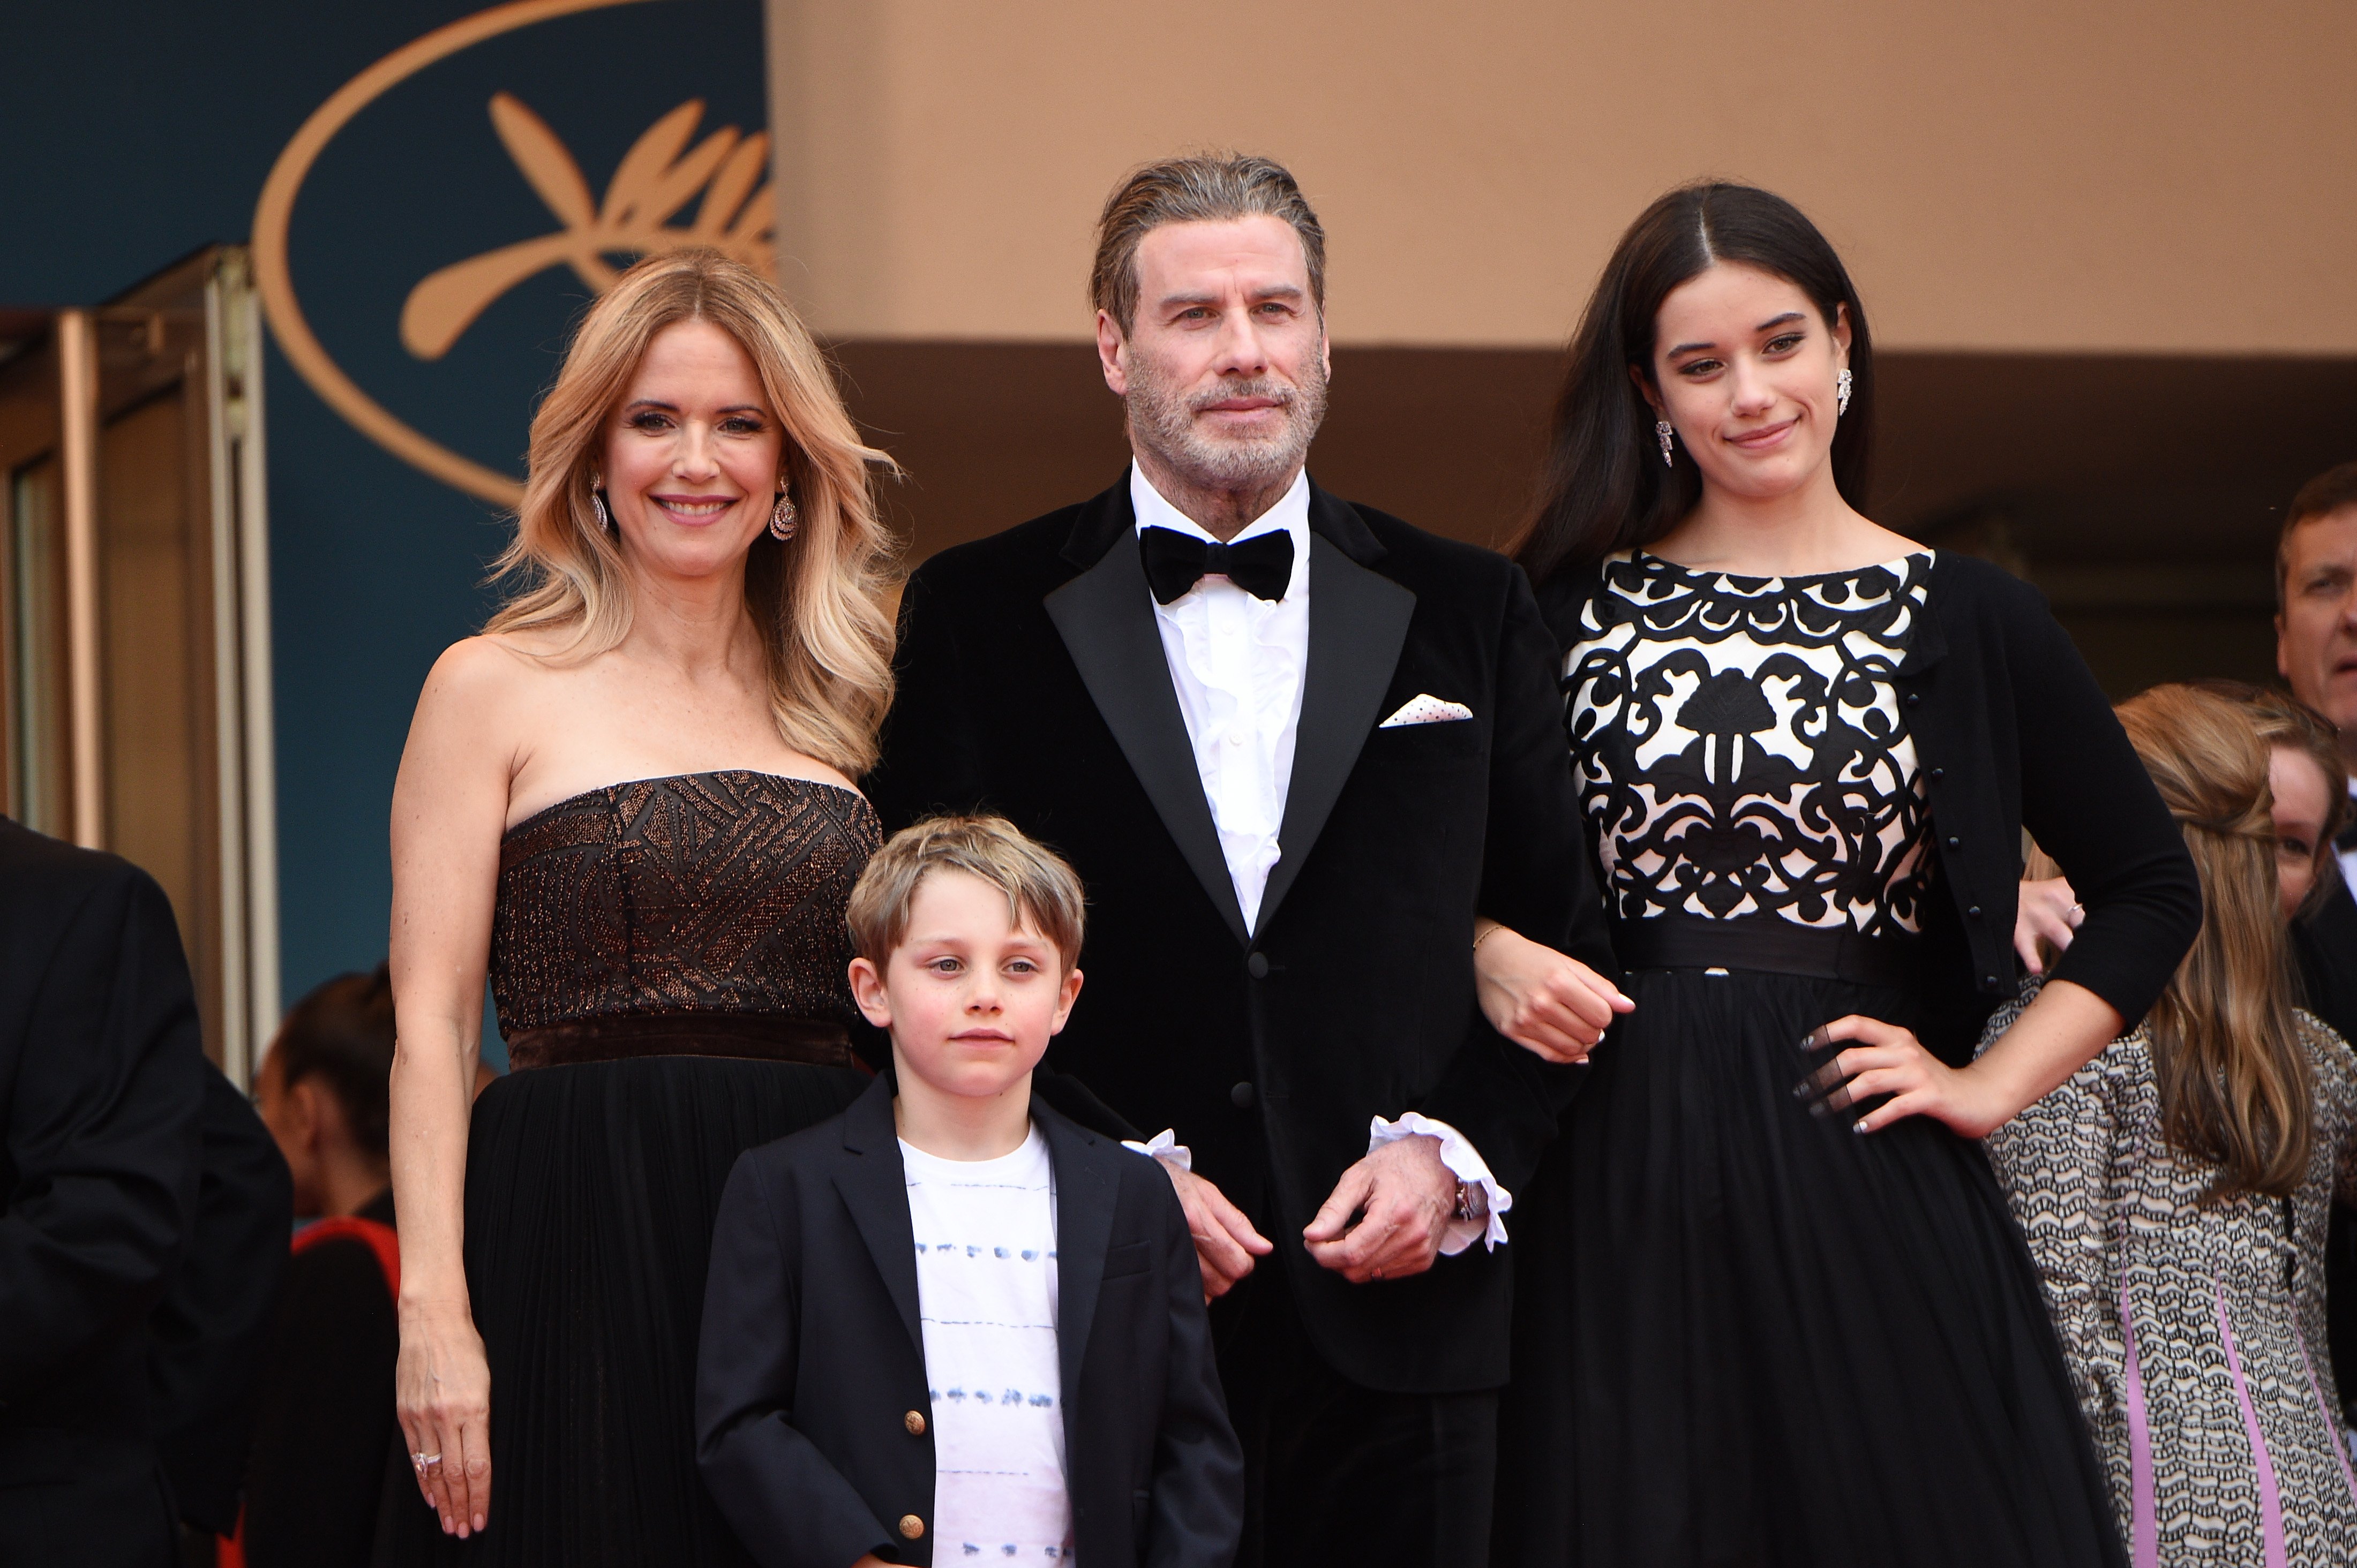 John Travolta with his wife Kelly Preston and their children Ella and Benjamin at the Cannes Film festival in 2018. | Source: Getty Images 